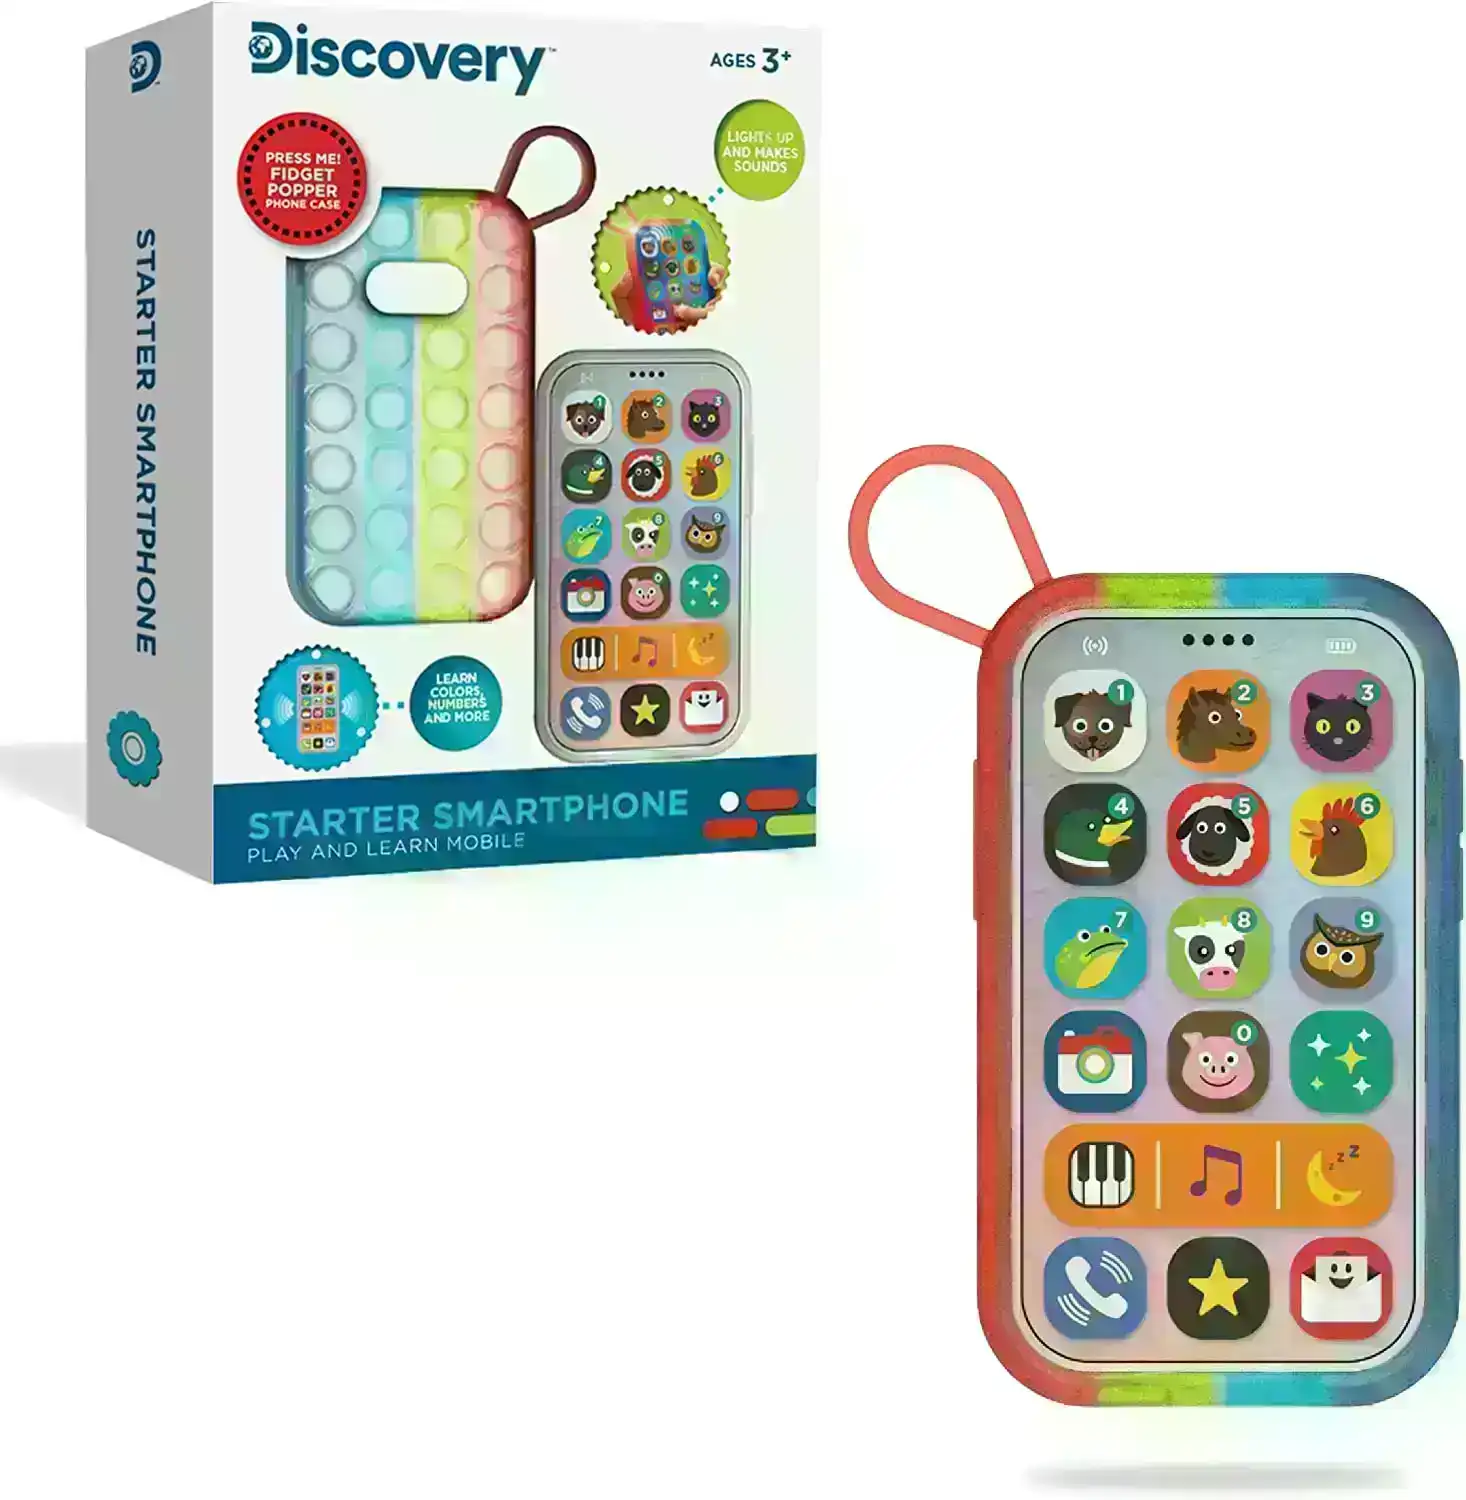 Discovery Starter Smartphone